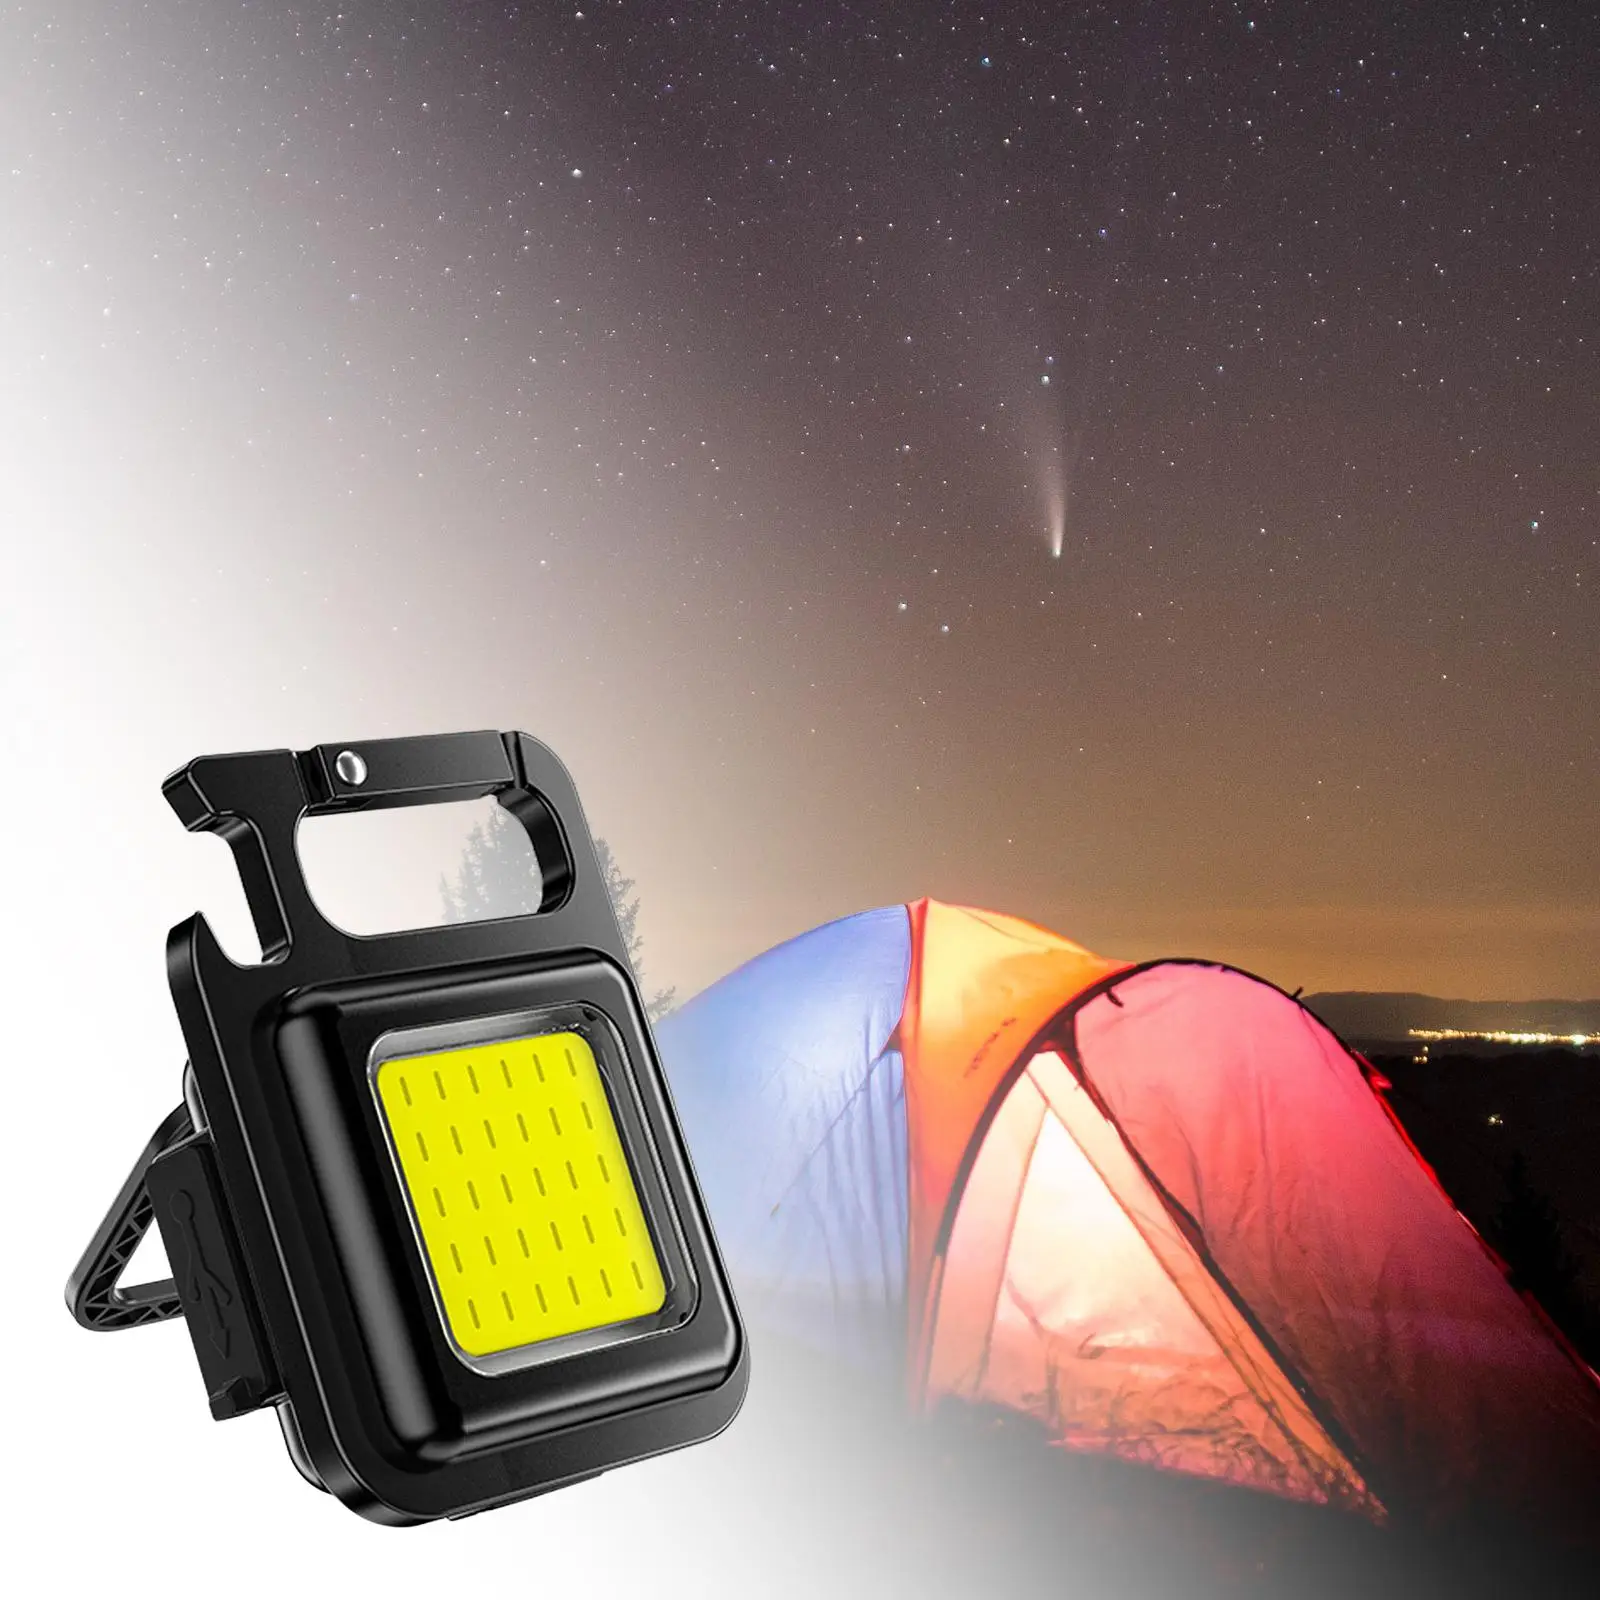 Portable COB Flashlight Rechargeable Bottle Opener Torch Lamp Waterproof Emergency Light for Fishing Camping Walking Outdoor